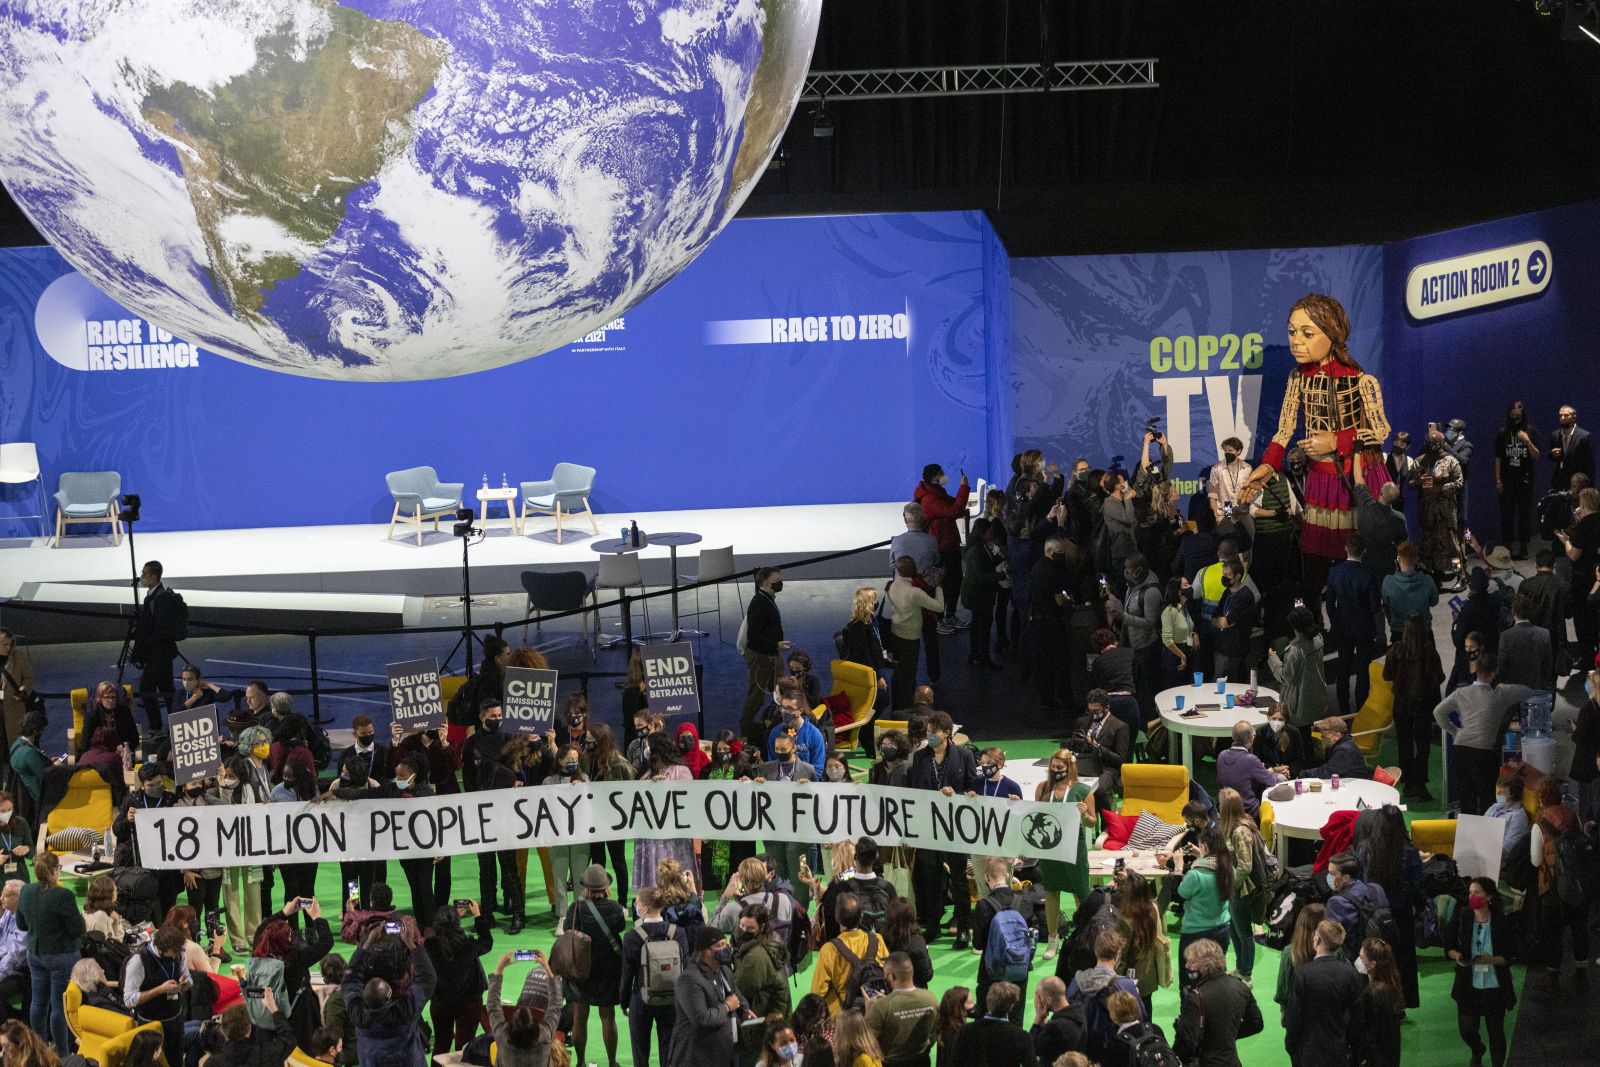 epa09572554 Delegates and participants gather around Little Amal (C), in the Hydro during the COP26 UN Climate Summit in Glasgow, Britain, 09 November 2021. Little Amal is the giant puppet of a 3.5 metre-tall living artwork of a young Syrian refugee child on 'The Walk', travelling 8,000km in 2021 in support of refugees across Turkey, Greece, Italy, France, Switzerland, Germany, Belgium and the UK to focus attention on the urgent needs of young refugees. The 2021 United Nations Climate Change Conference (COP26) runs from 31 October to 12 November 2021 in Glasgow.  EPA/ROBERT PERRY